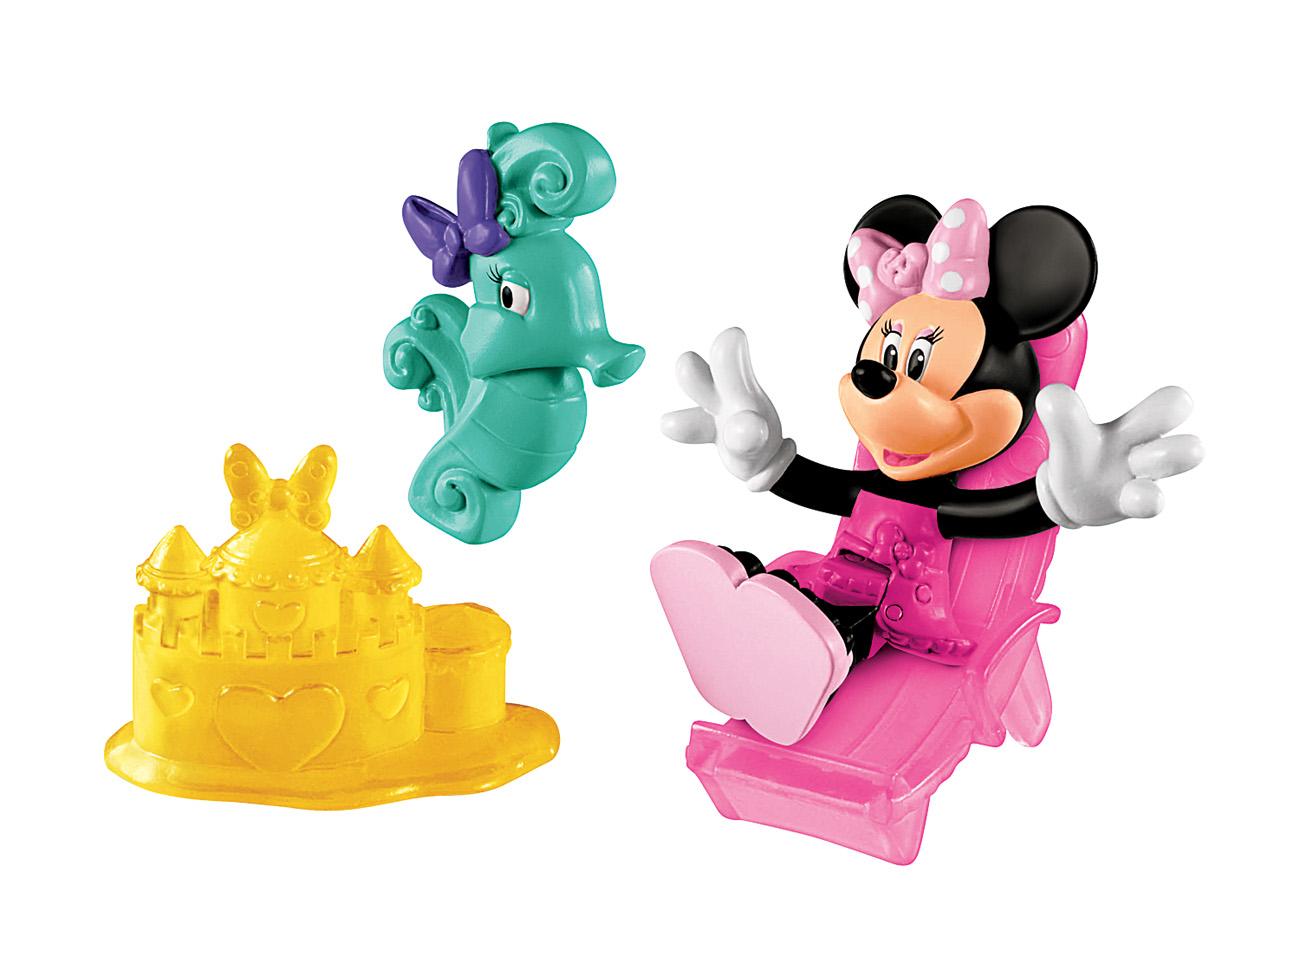 Fisher-Price Disney Minnie & Daisy Figures Pack; image 1 of 2